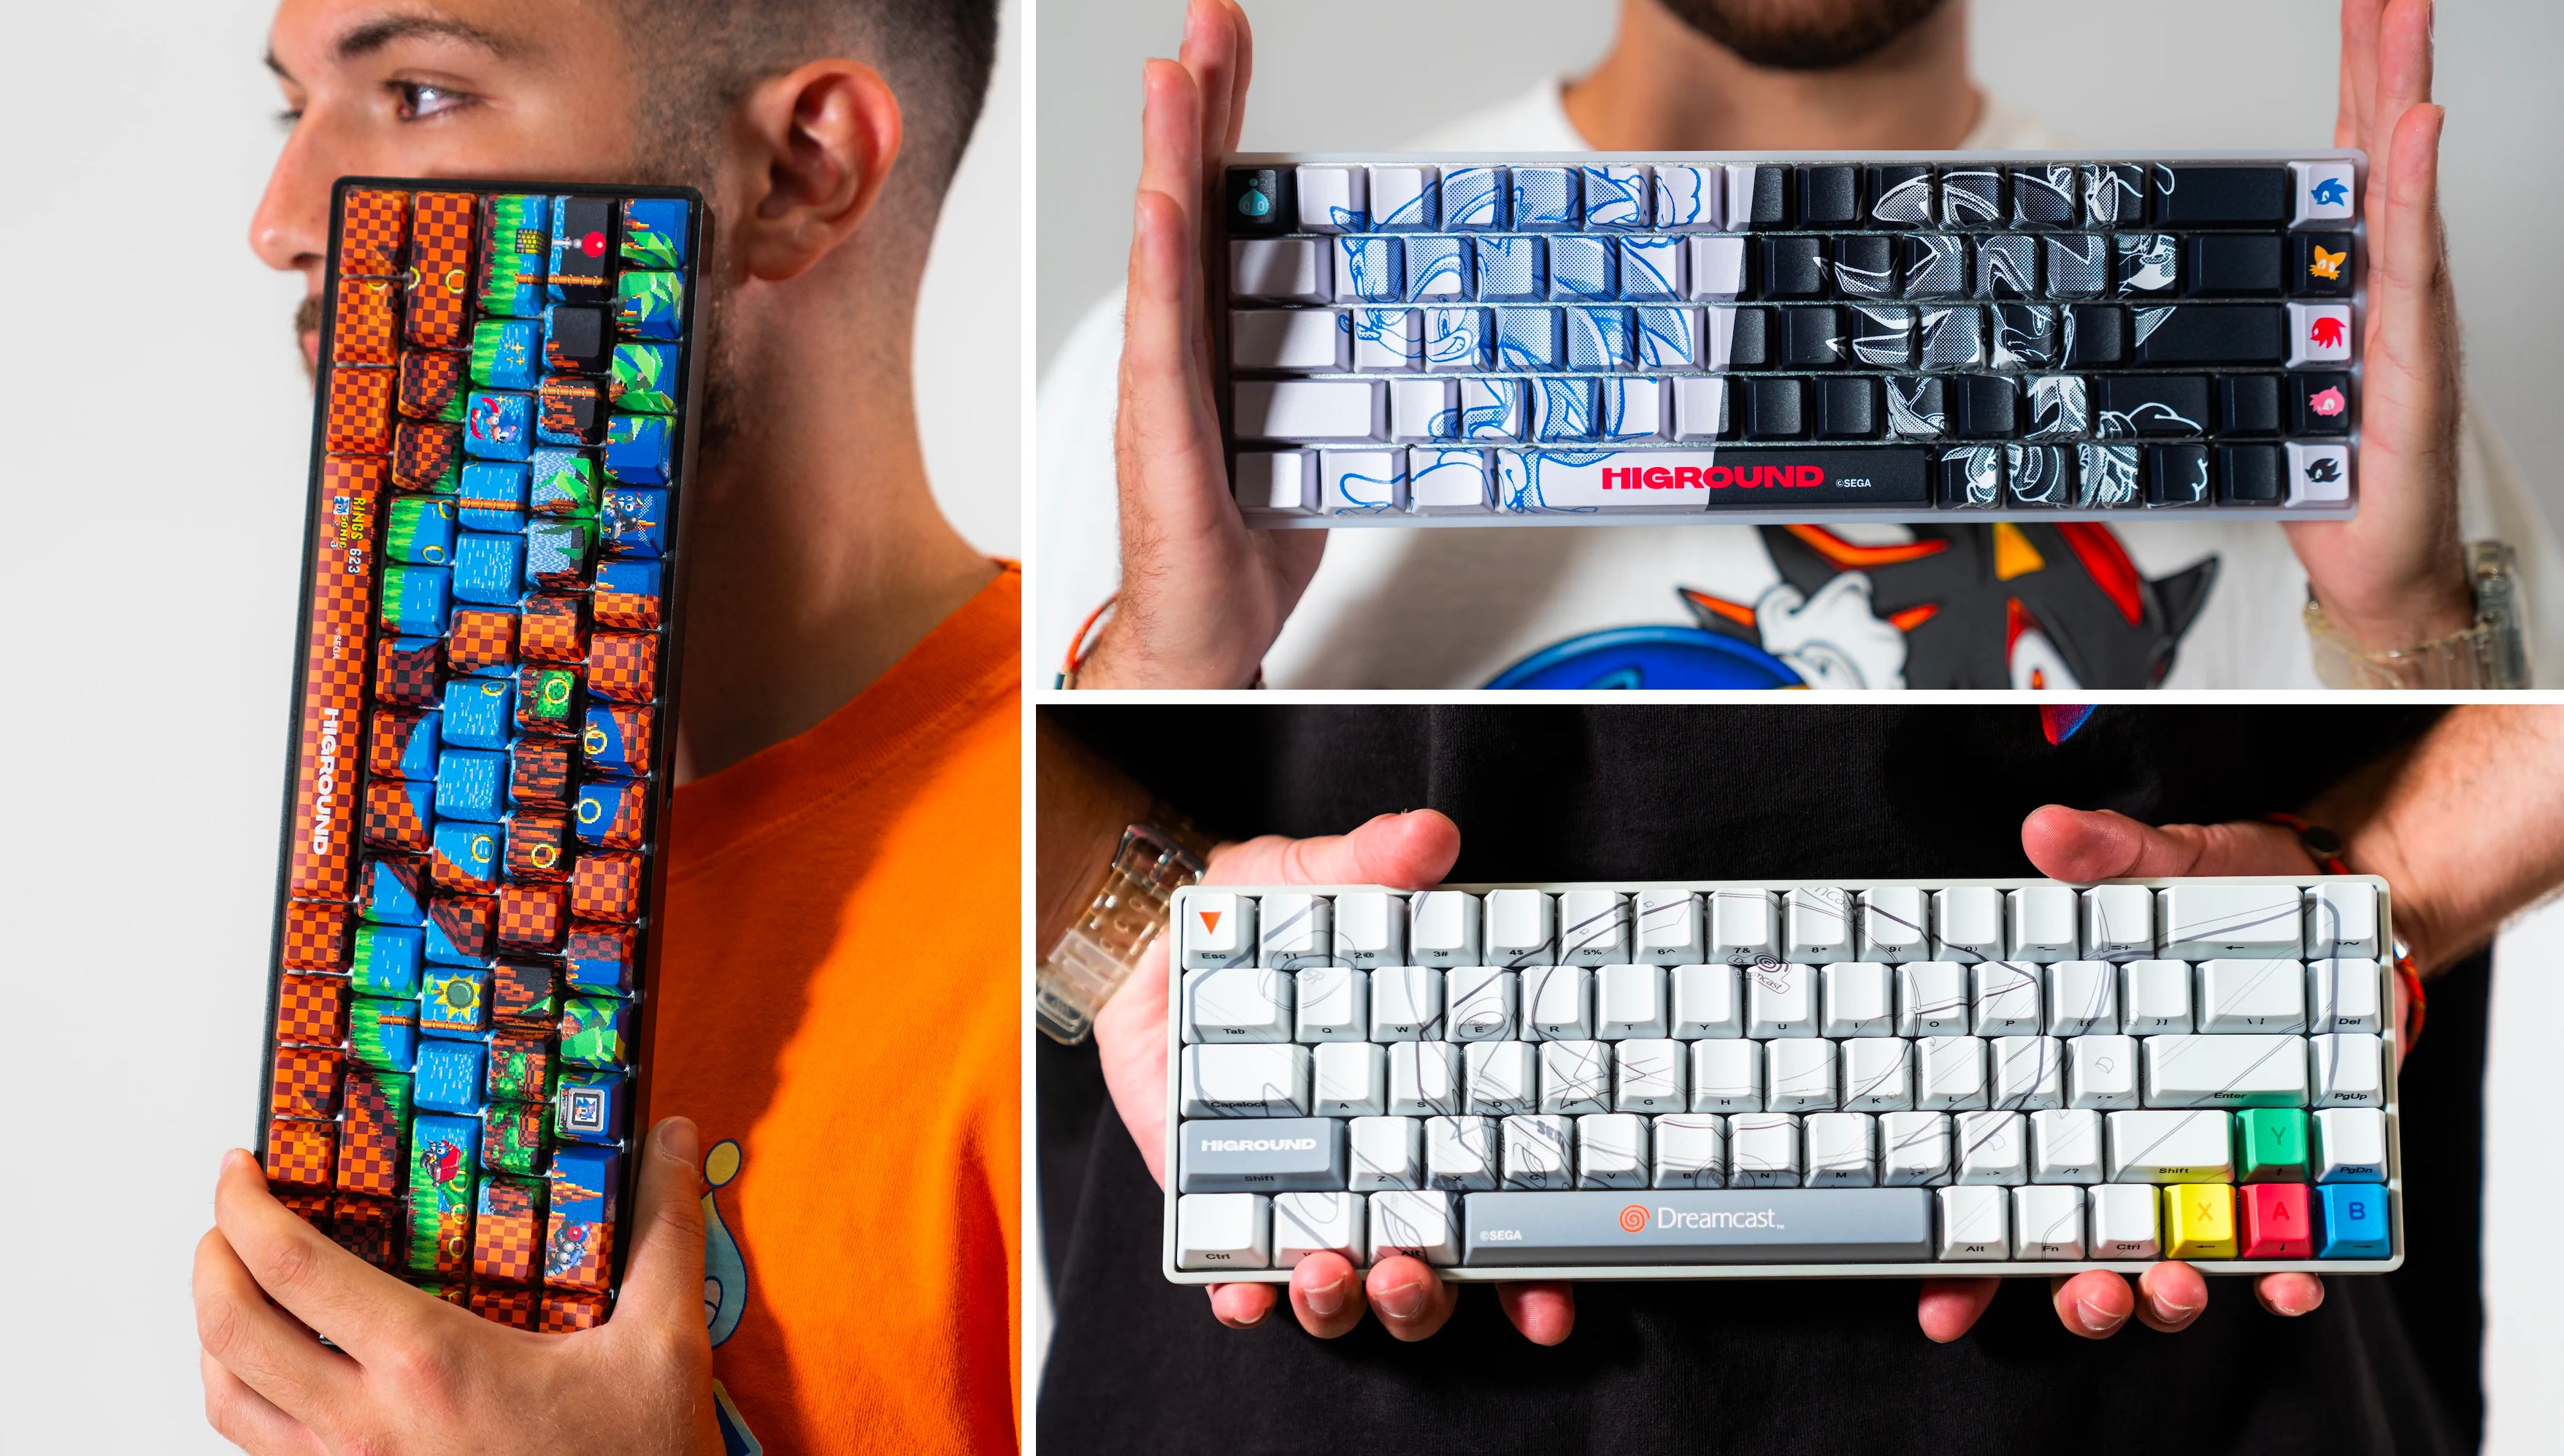 These Sonic the Hedgehog Themed Keyboards Could Ironically Slow Your Typing Speed